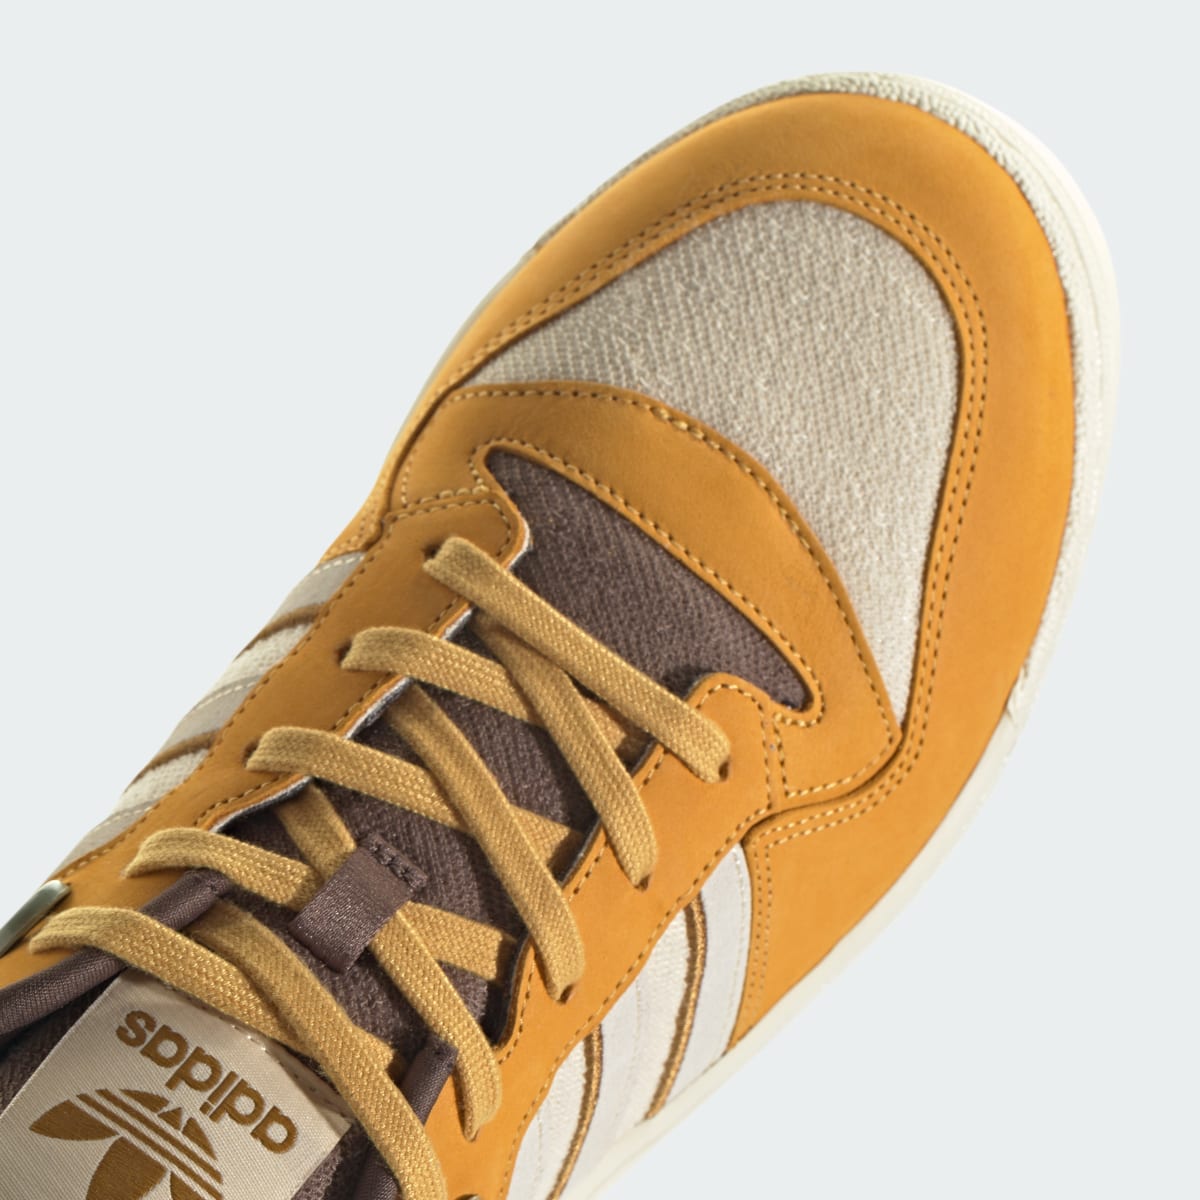 Adidas Rivalry Low 86 Basketball Shoes. 9